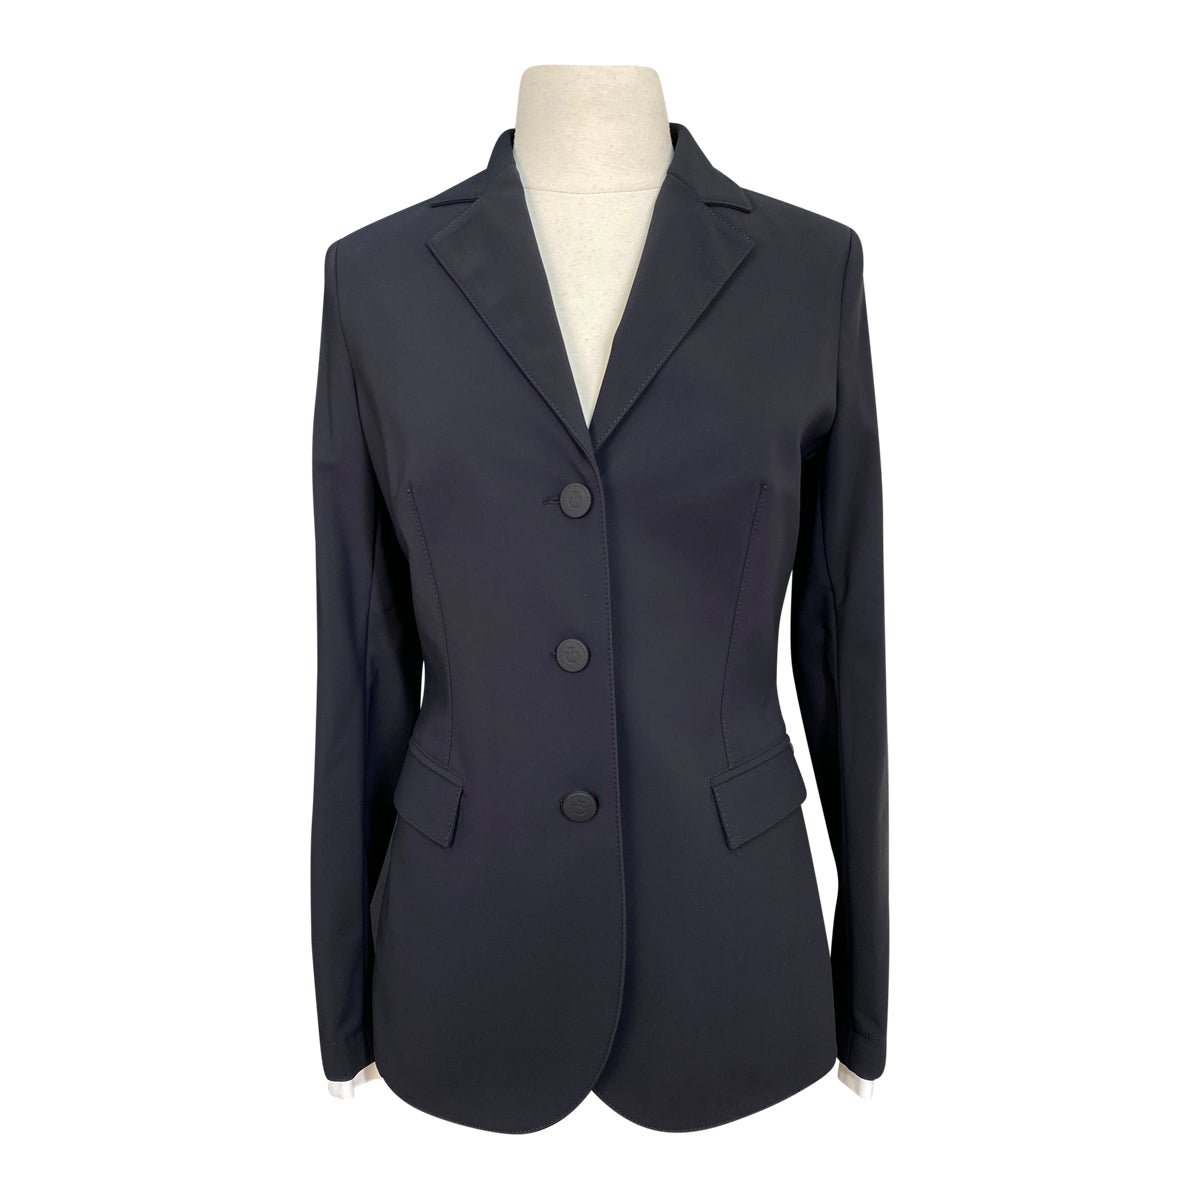 Cavalleria Toscana 'American' Competition Jacket in Black